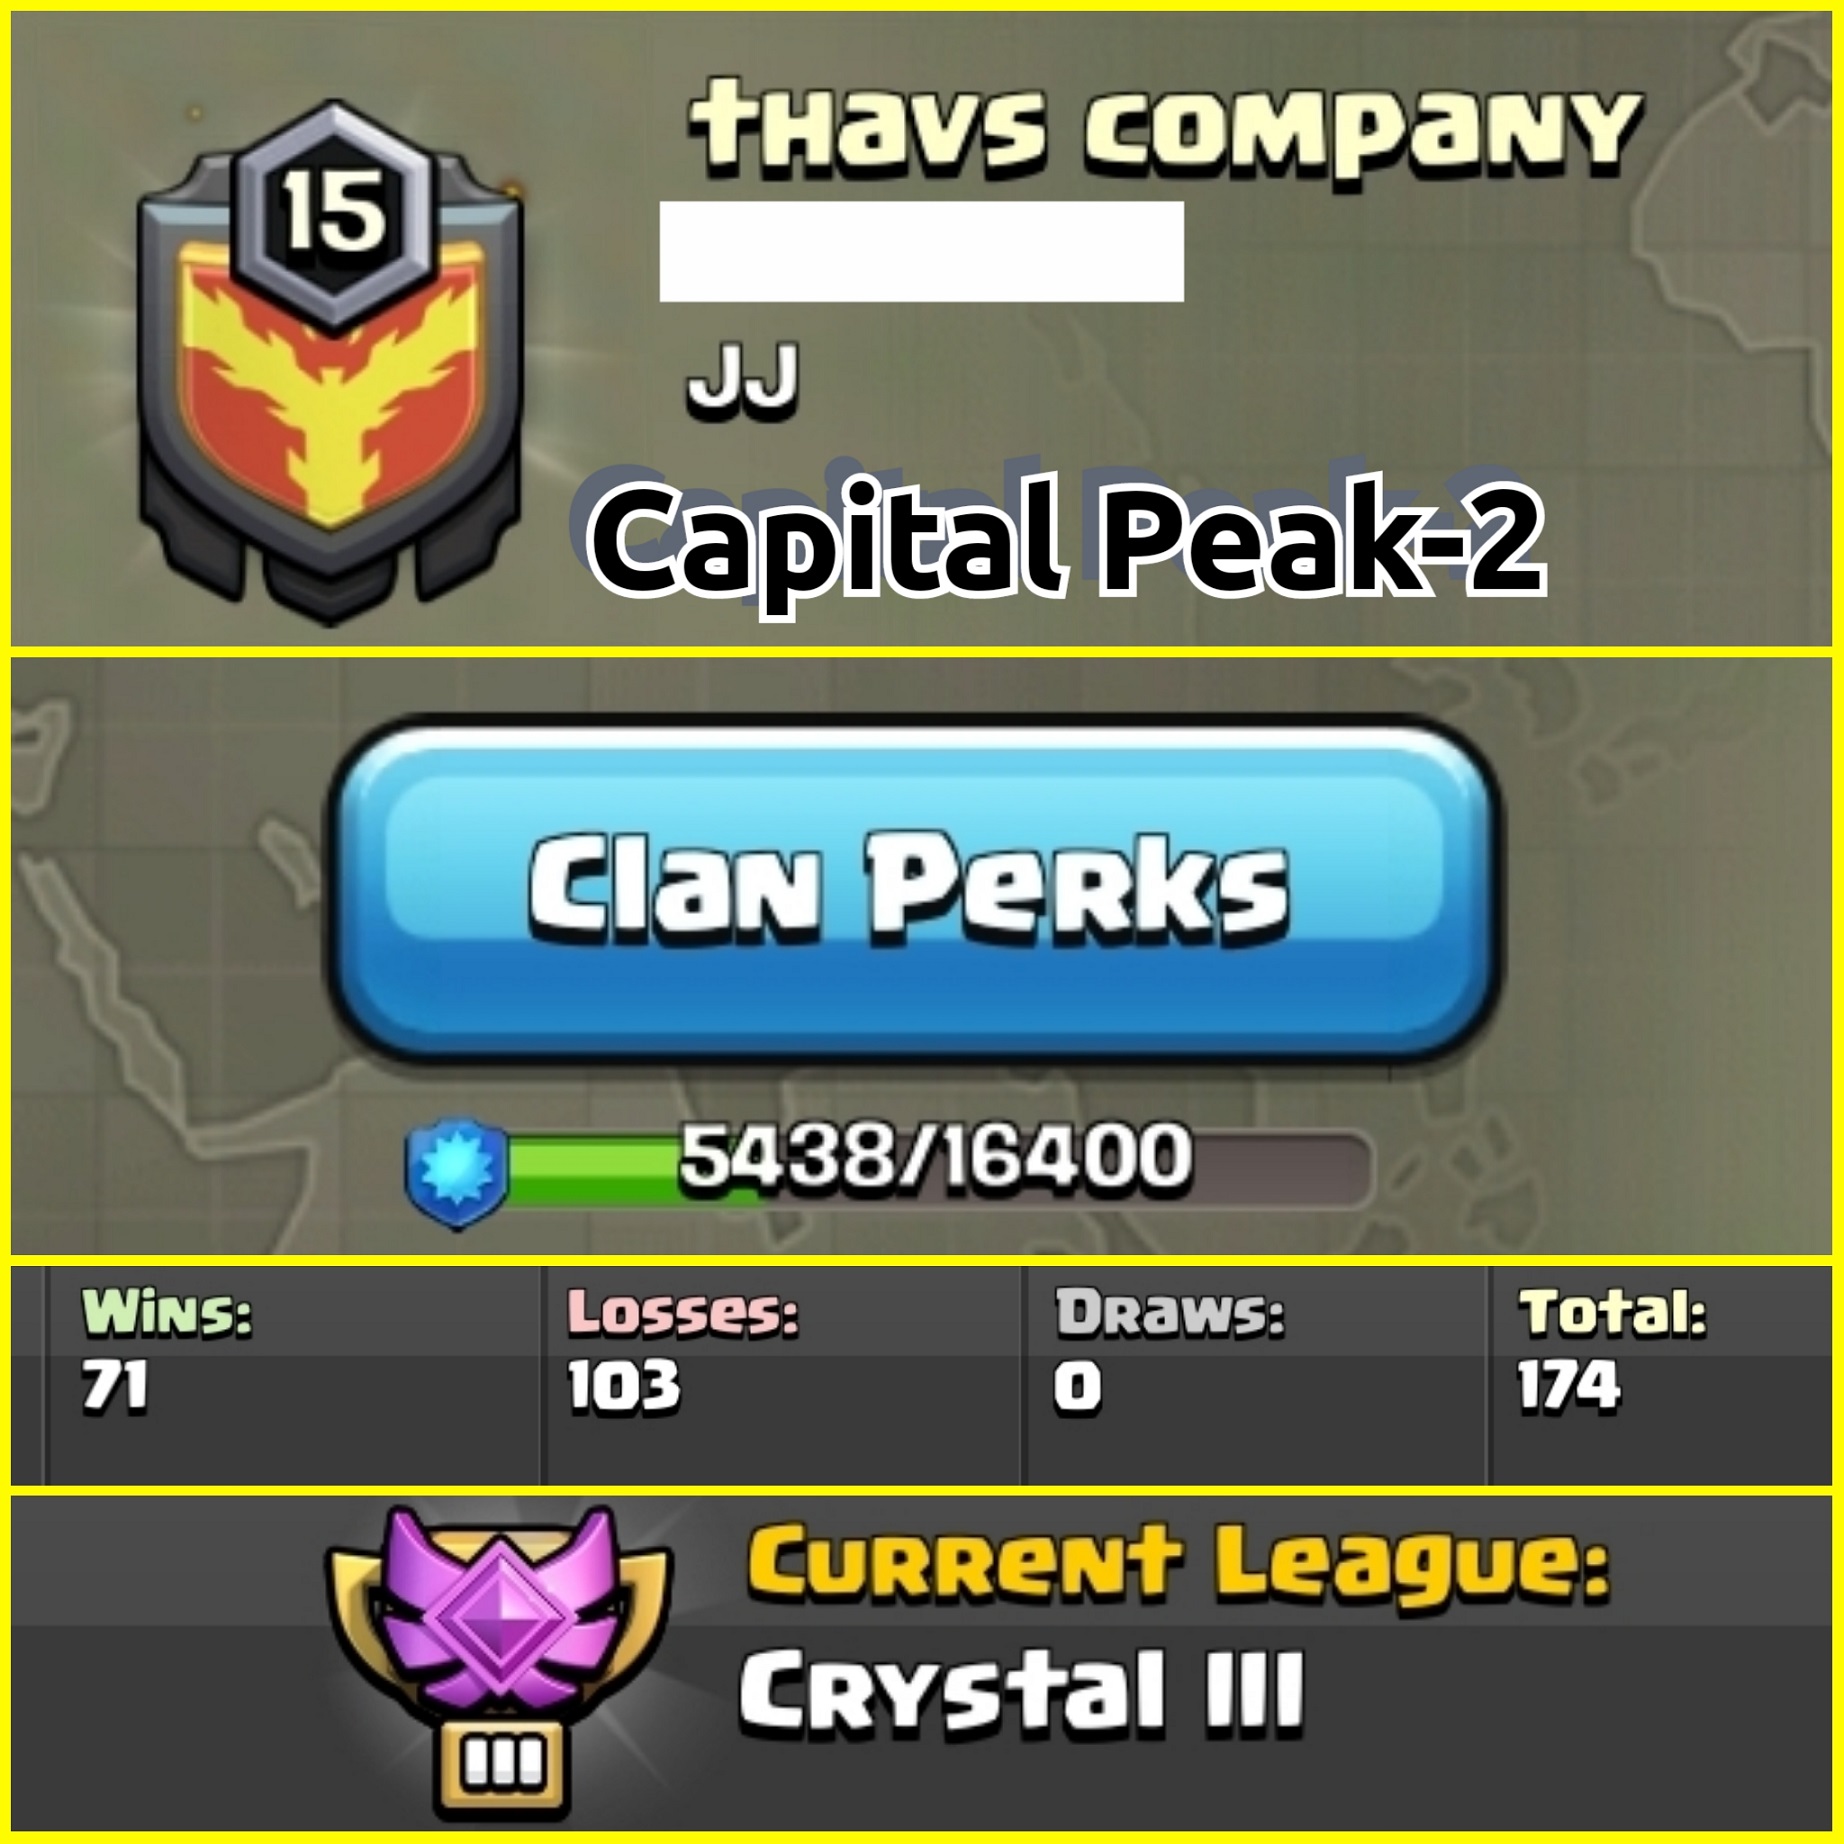 || Level - 15 || Name - thavs company || Crystal League 3 || Capital Peak 2 || Both Android and iOS || Fast Delivery ||